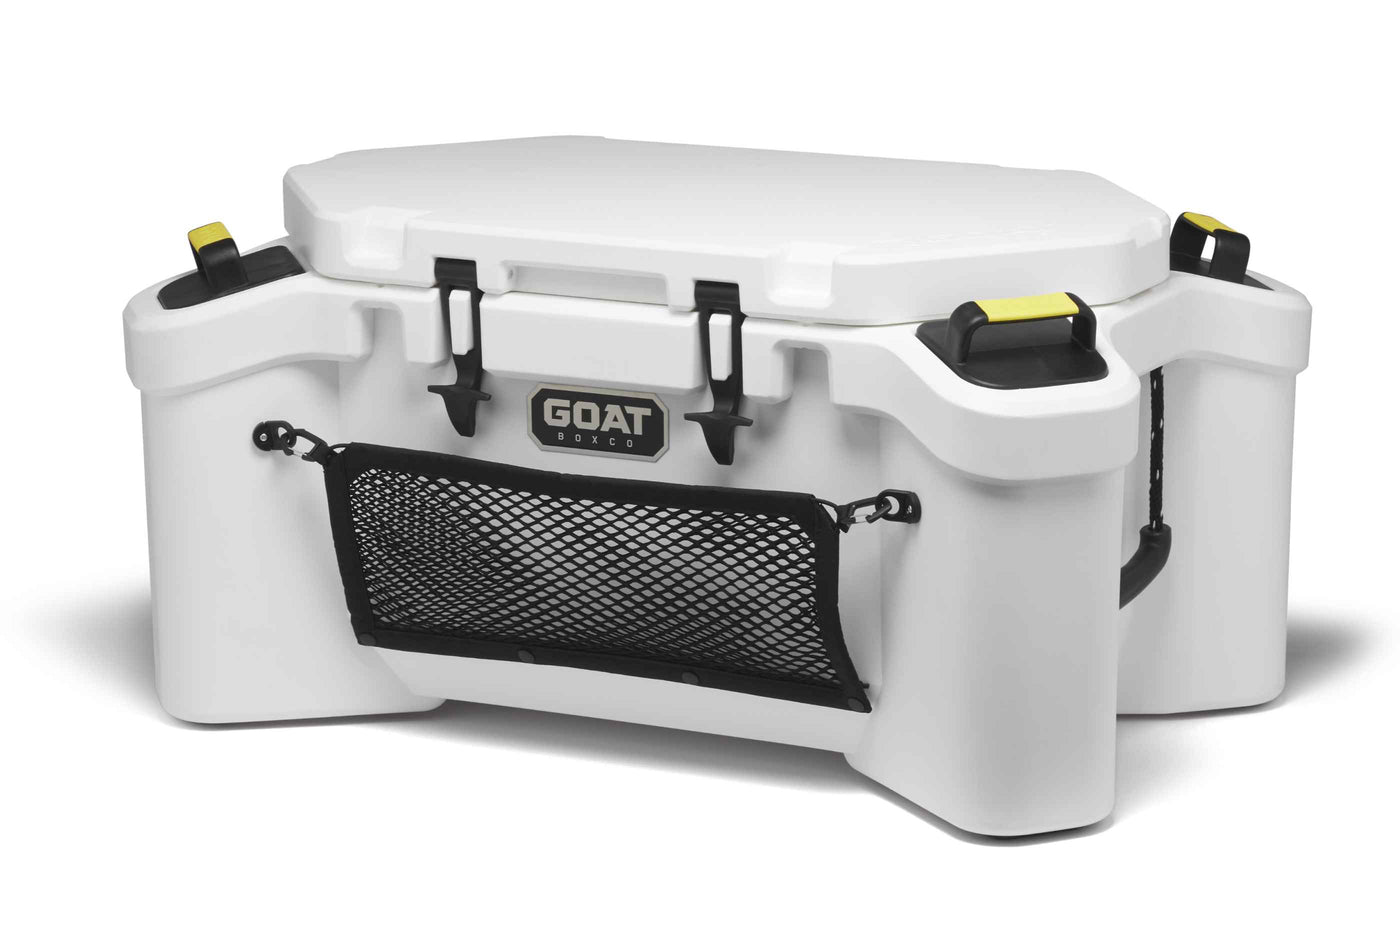 Goat Boxco Hub 70 Cooler System White, 70 qt - Ice Chests/Wtr Coolrs at Academy Sports